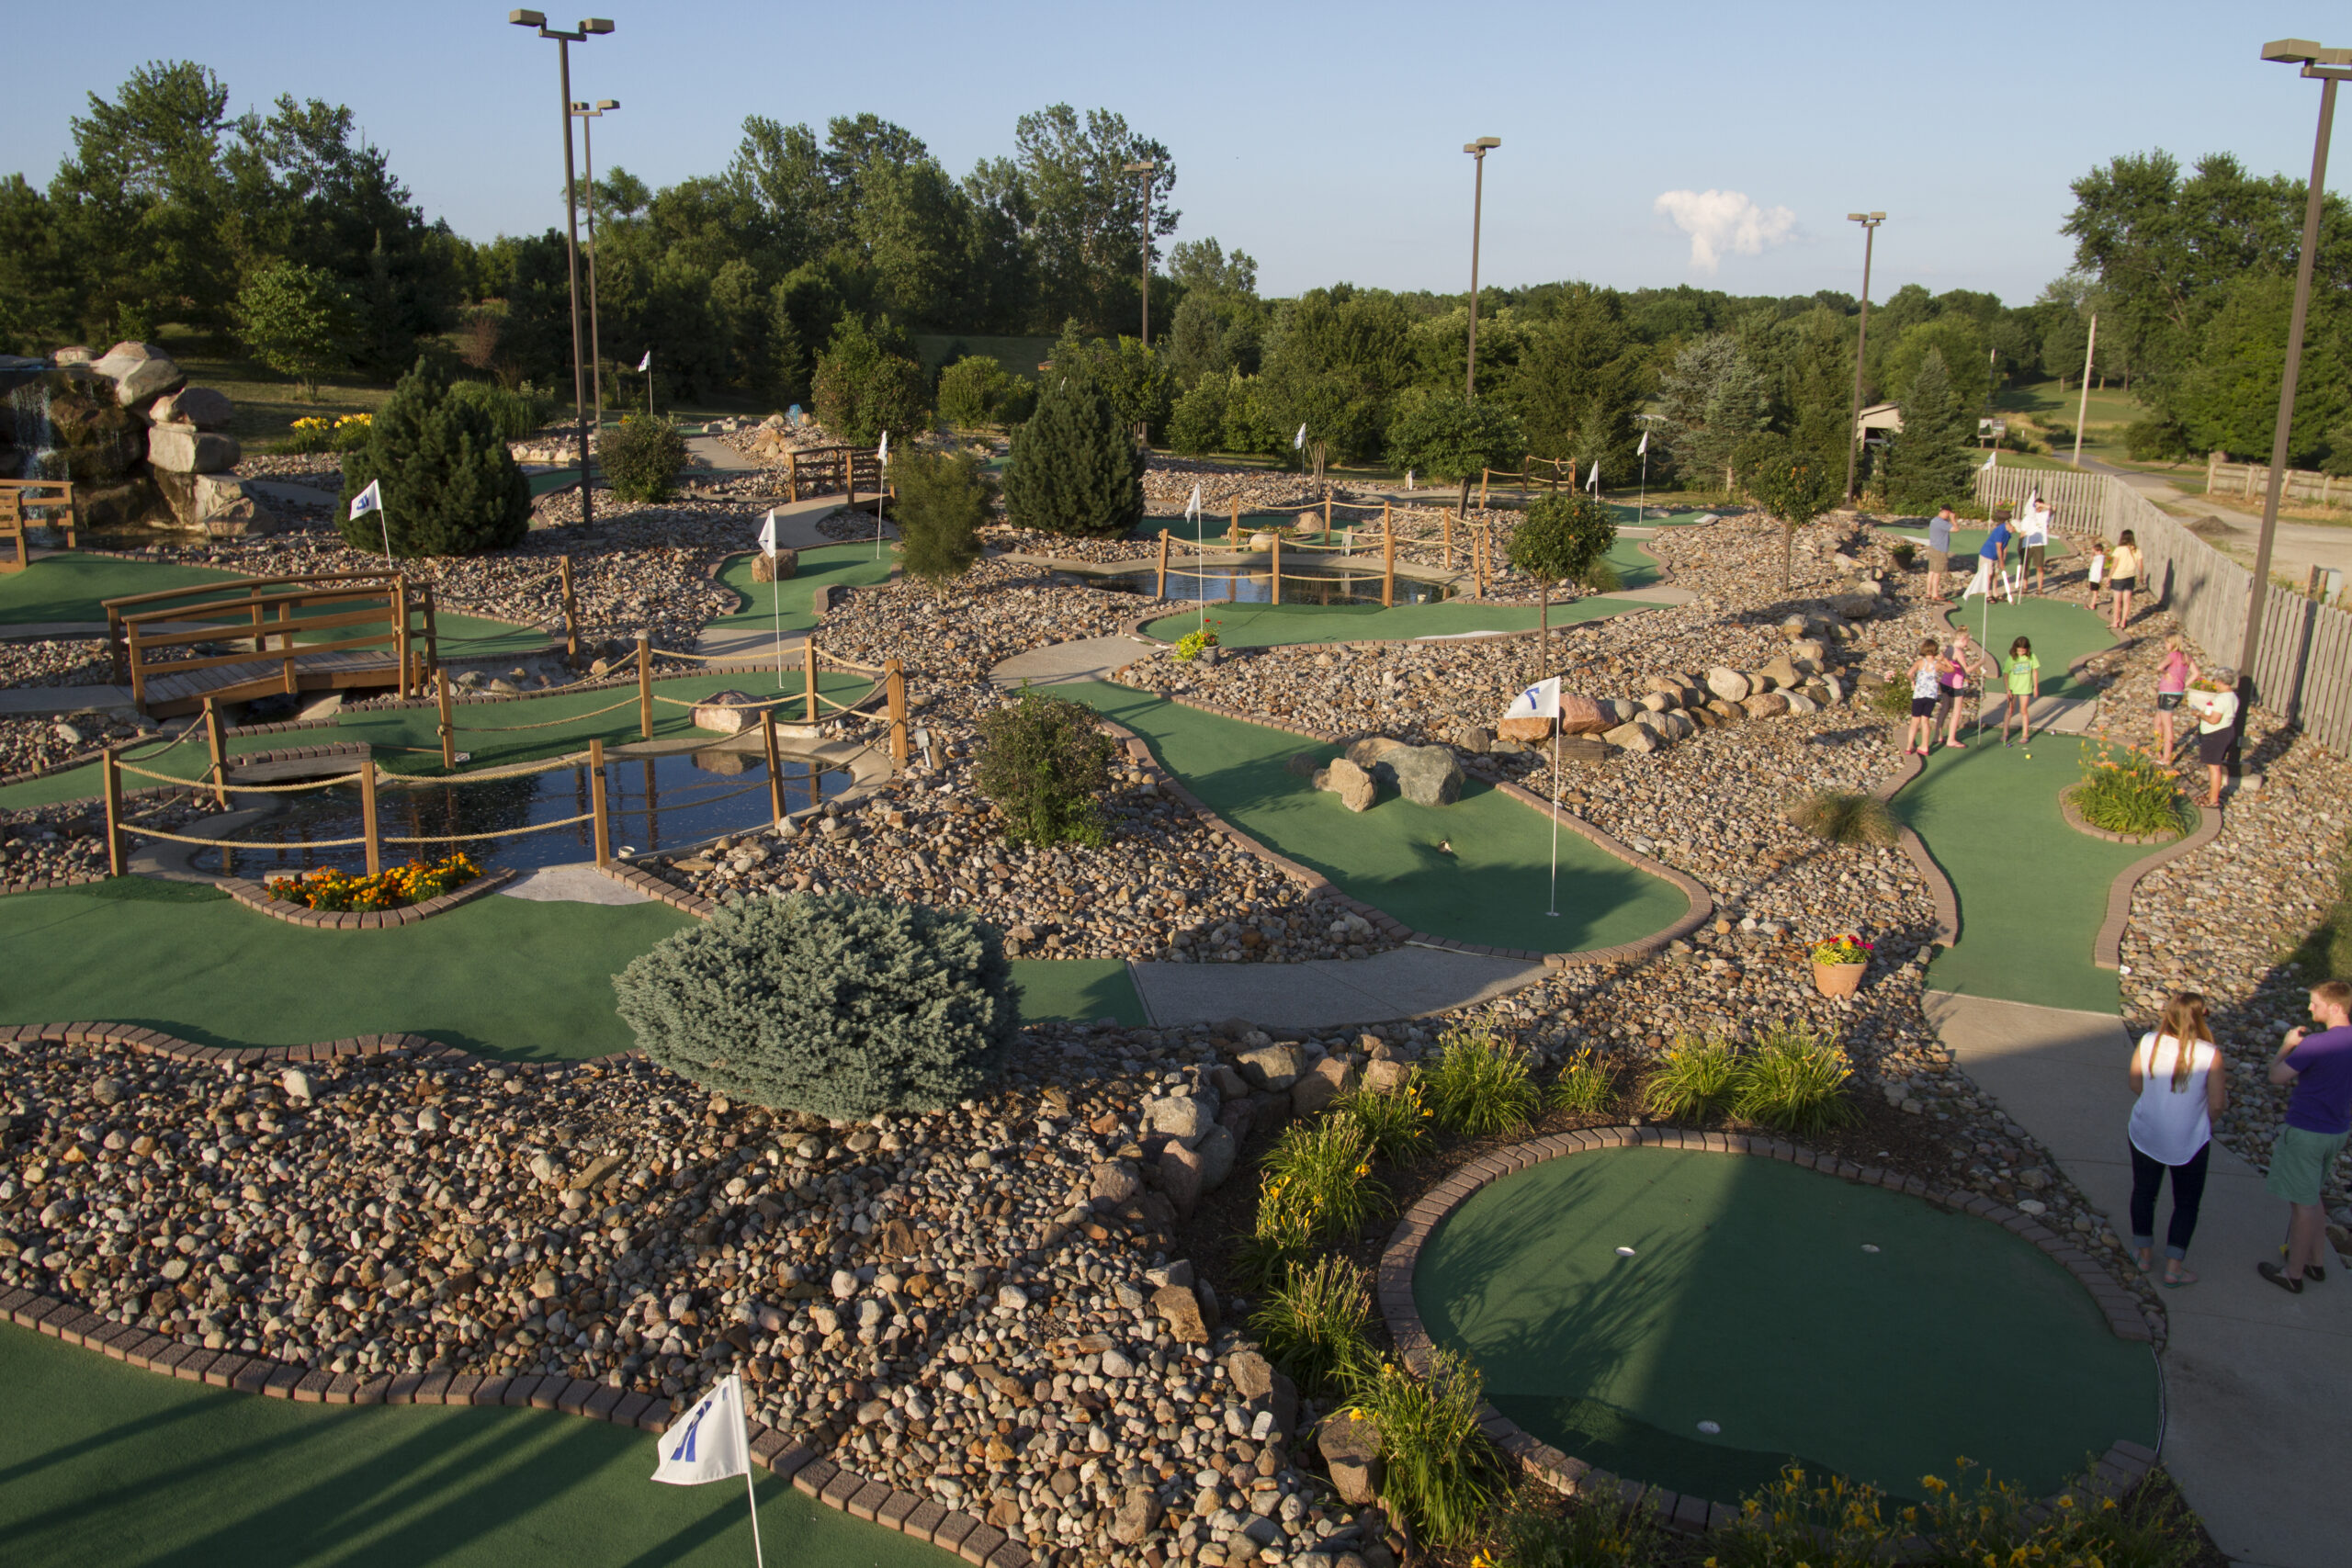 Miniature golf is a great memorable activity.